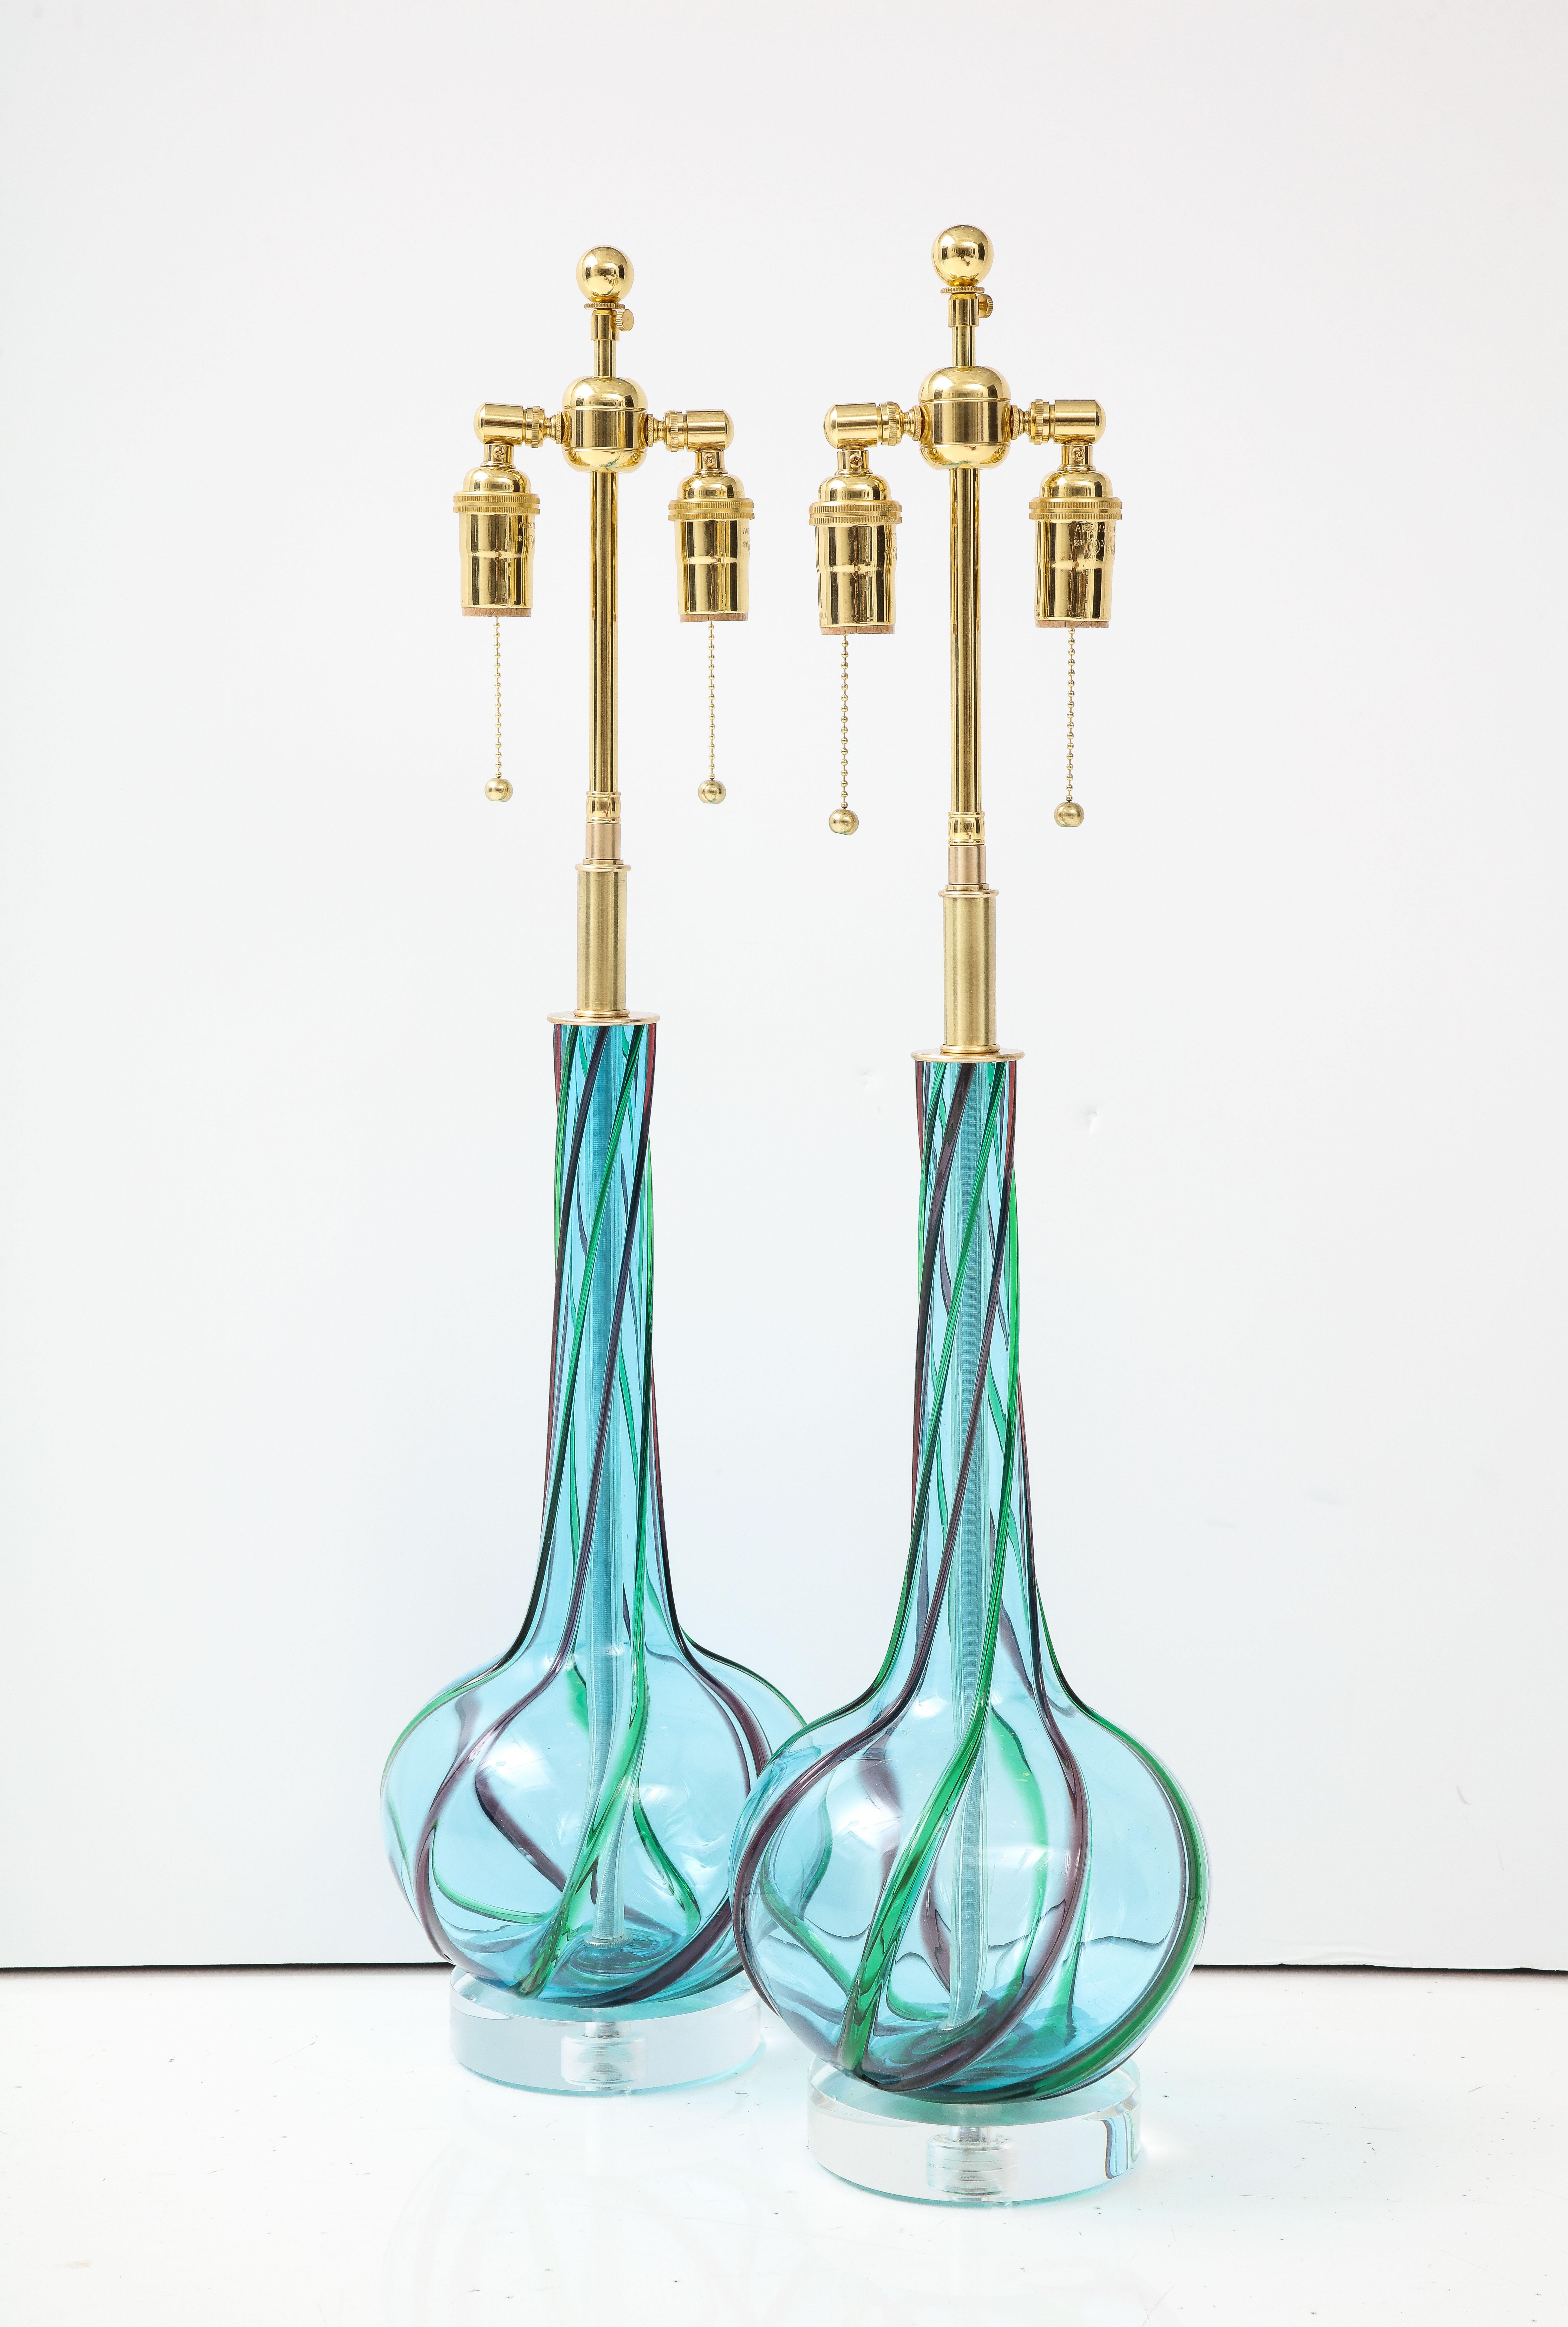 Pair of 1960's Blue Murano glass lamps with Green and Amethyst Ribbons.
The lamps are mounted on thick lucite bases and have been Newly rewired with adjustable polished brass double clusters that take standard Light bulbs.